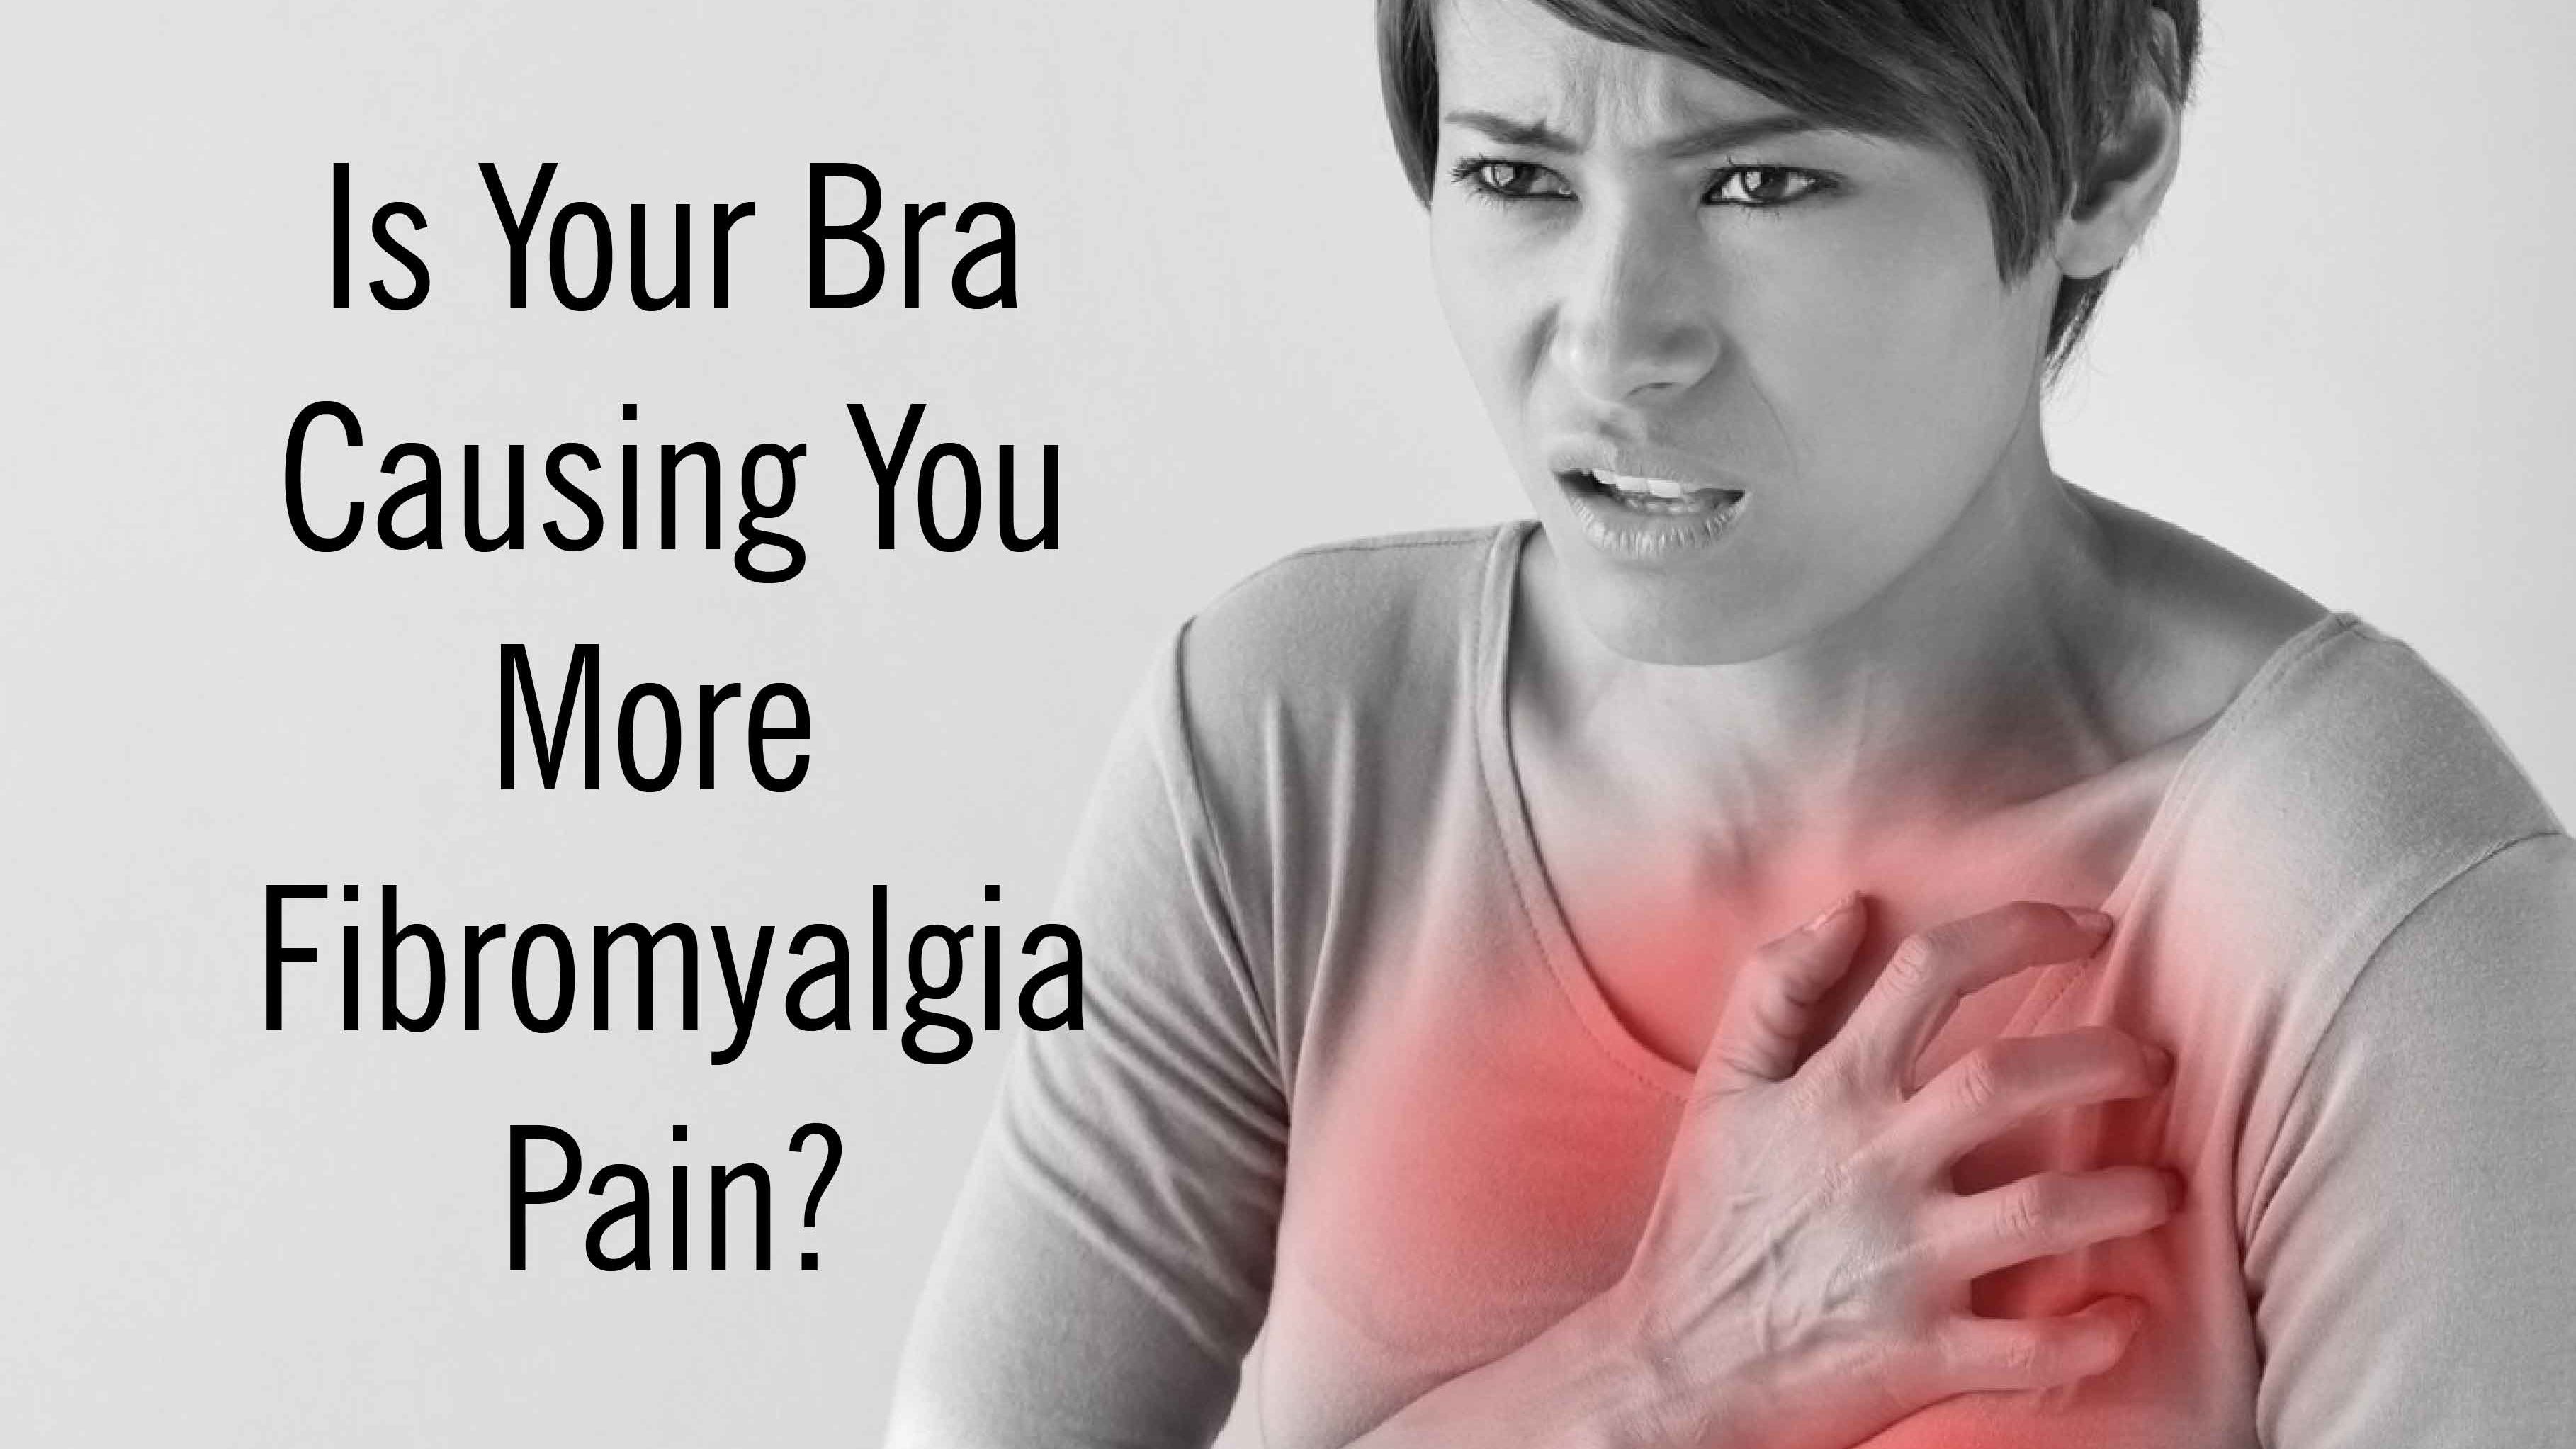 Is Your Bra Causing You More Fibromyalgia Pain?